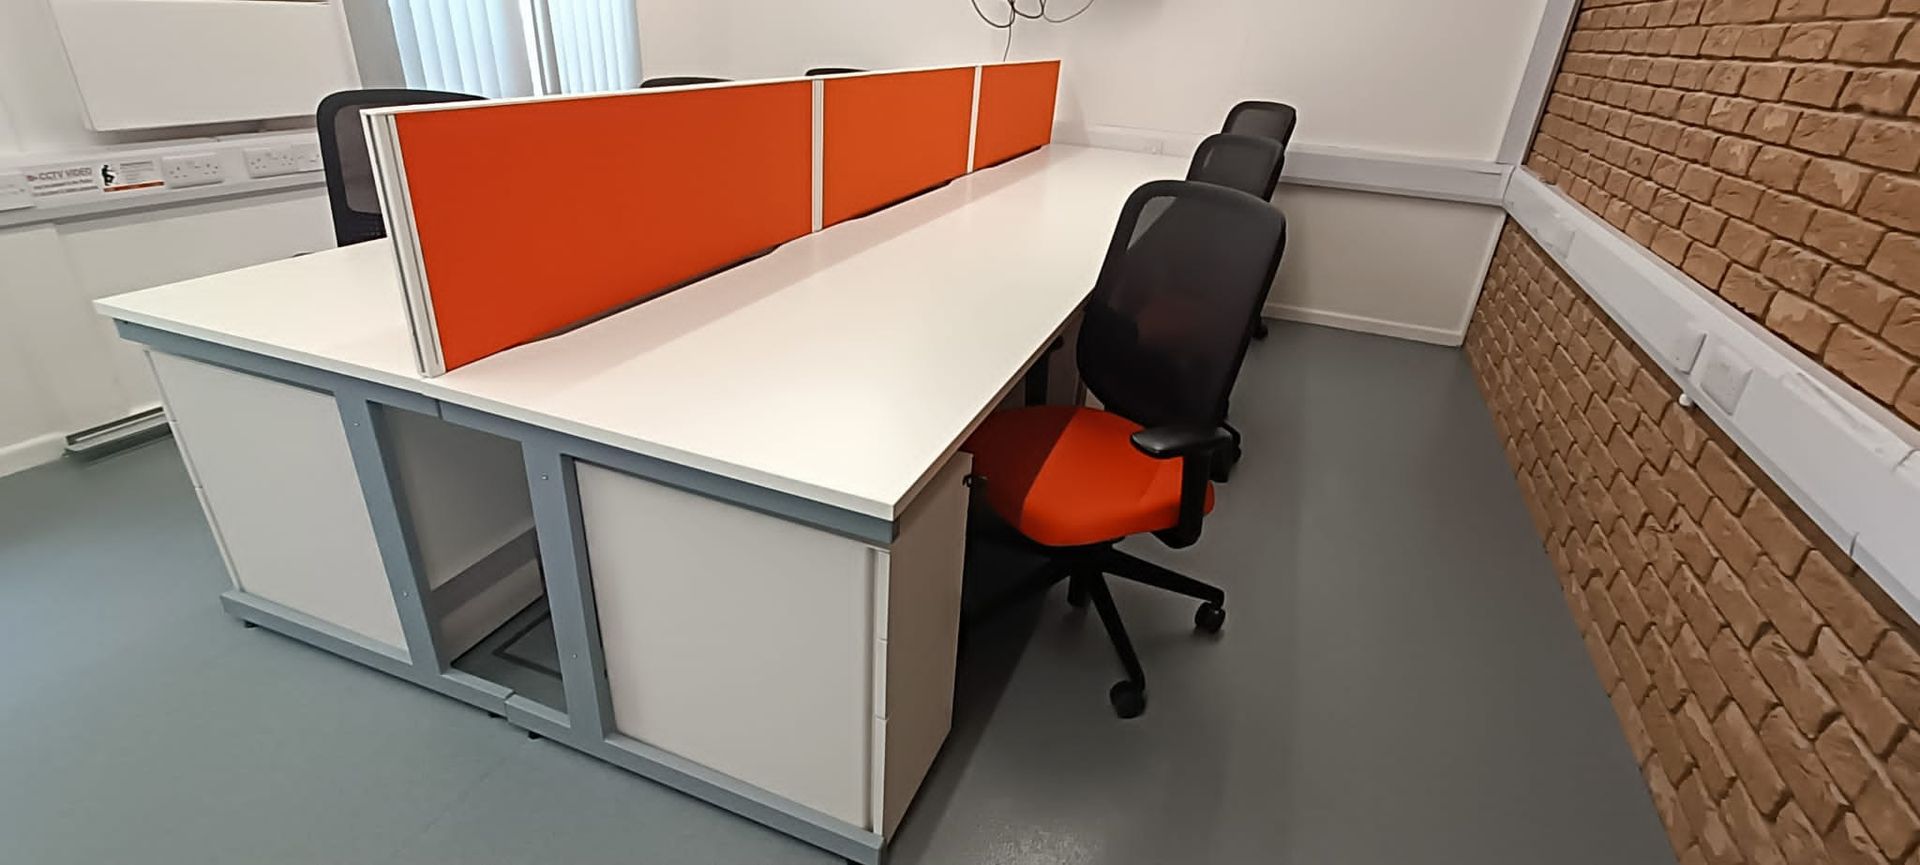 The office furniture in this photo is all refurbished used office furniture made to Fresh Waste Services requirements